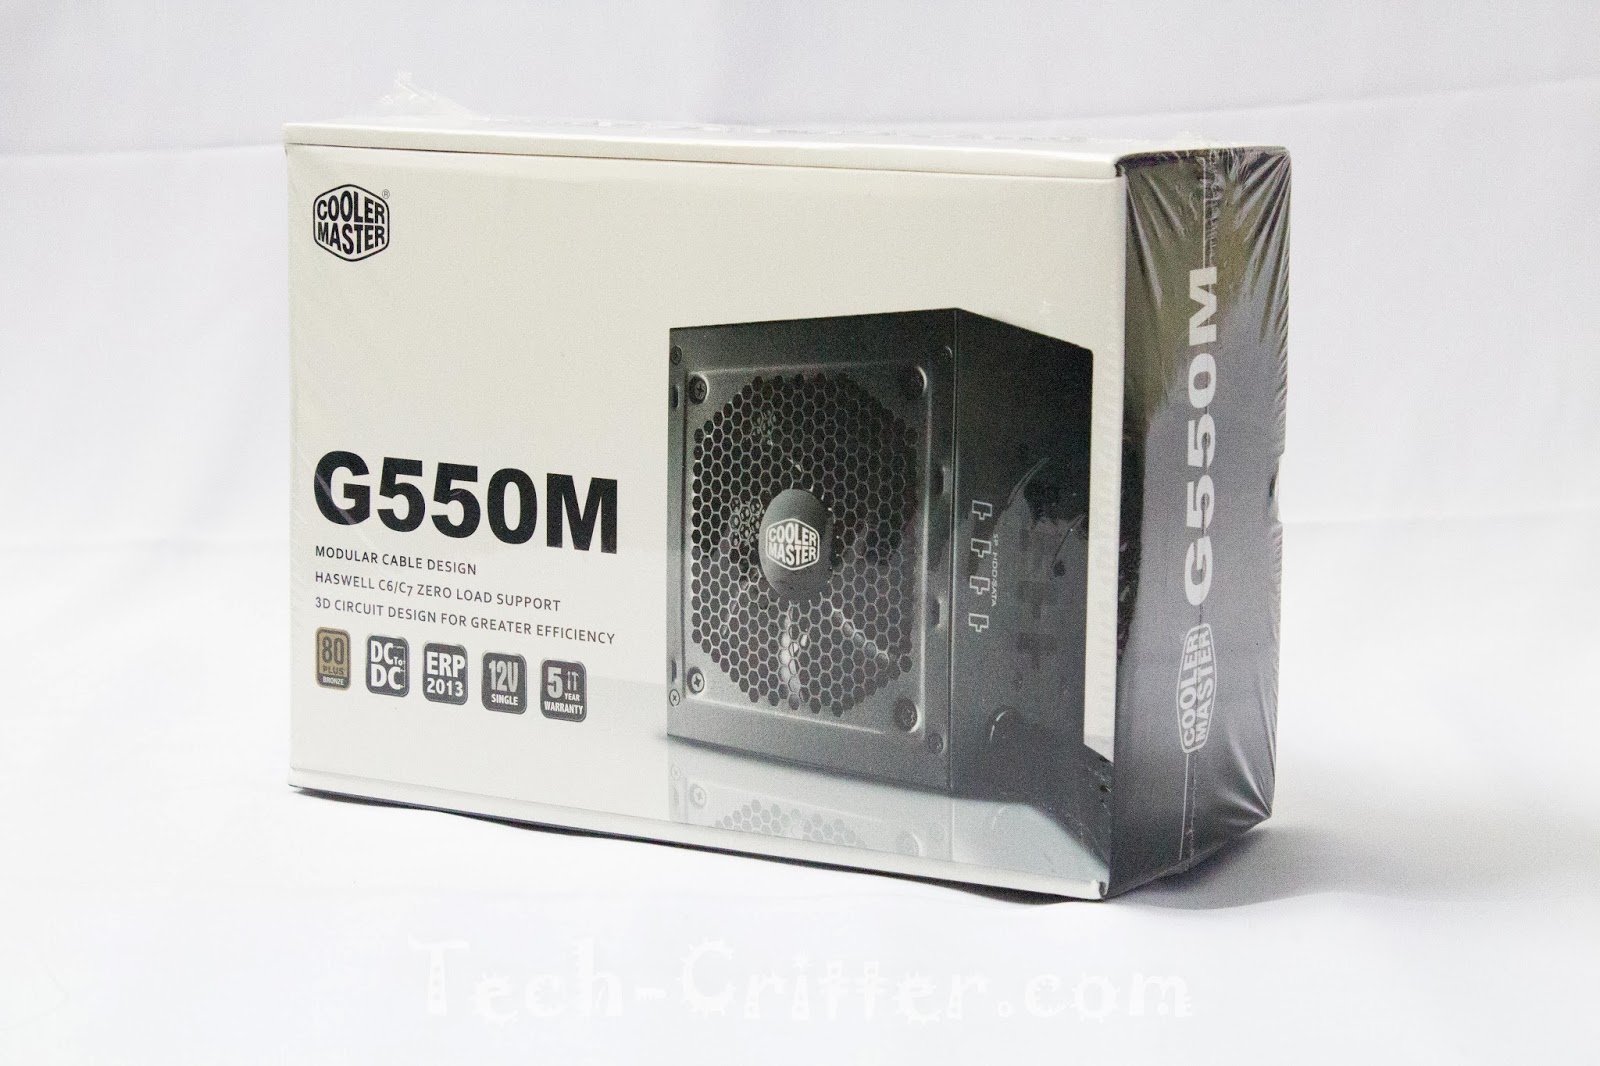 Cooler Master G550M Power Supply Unit Unboxing and Overview 25